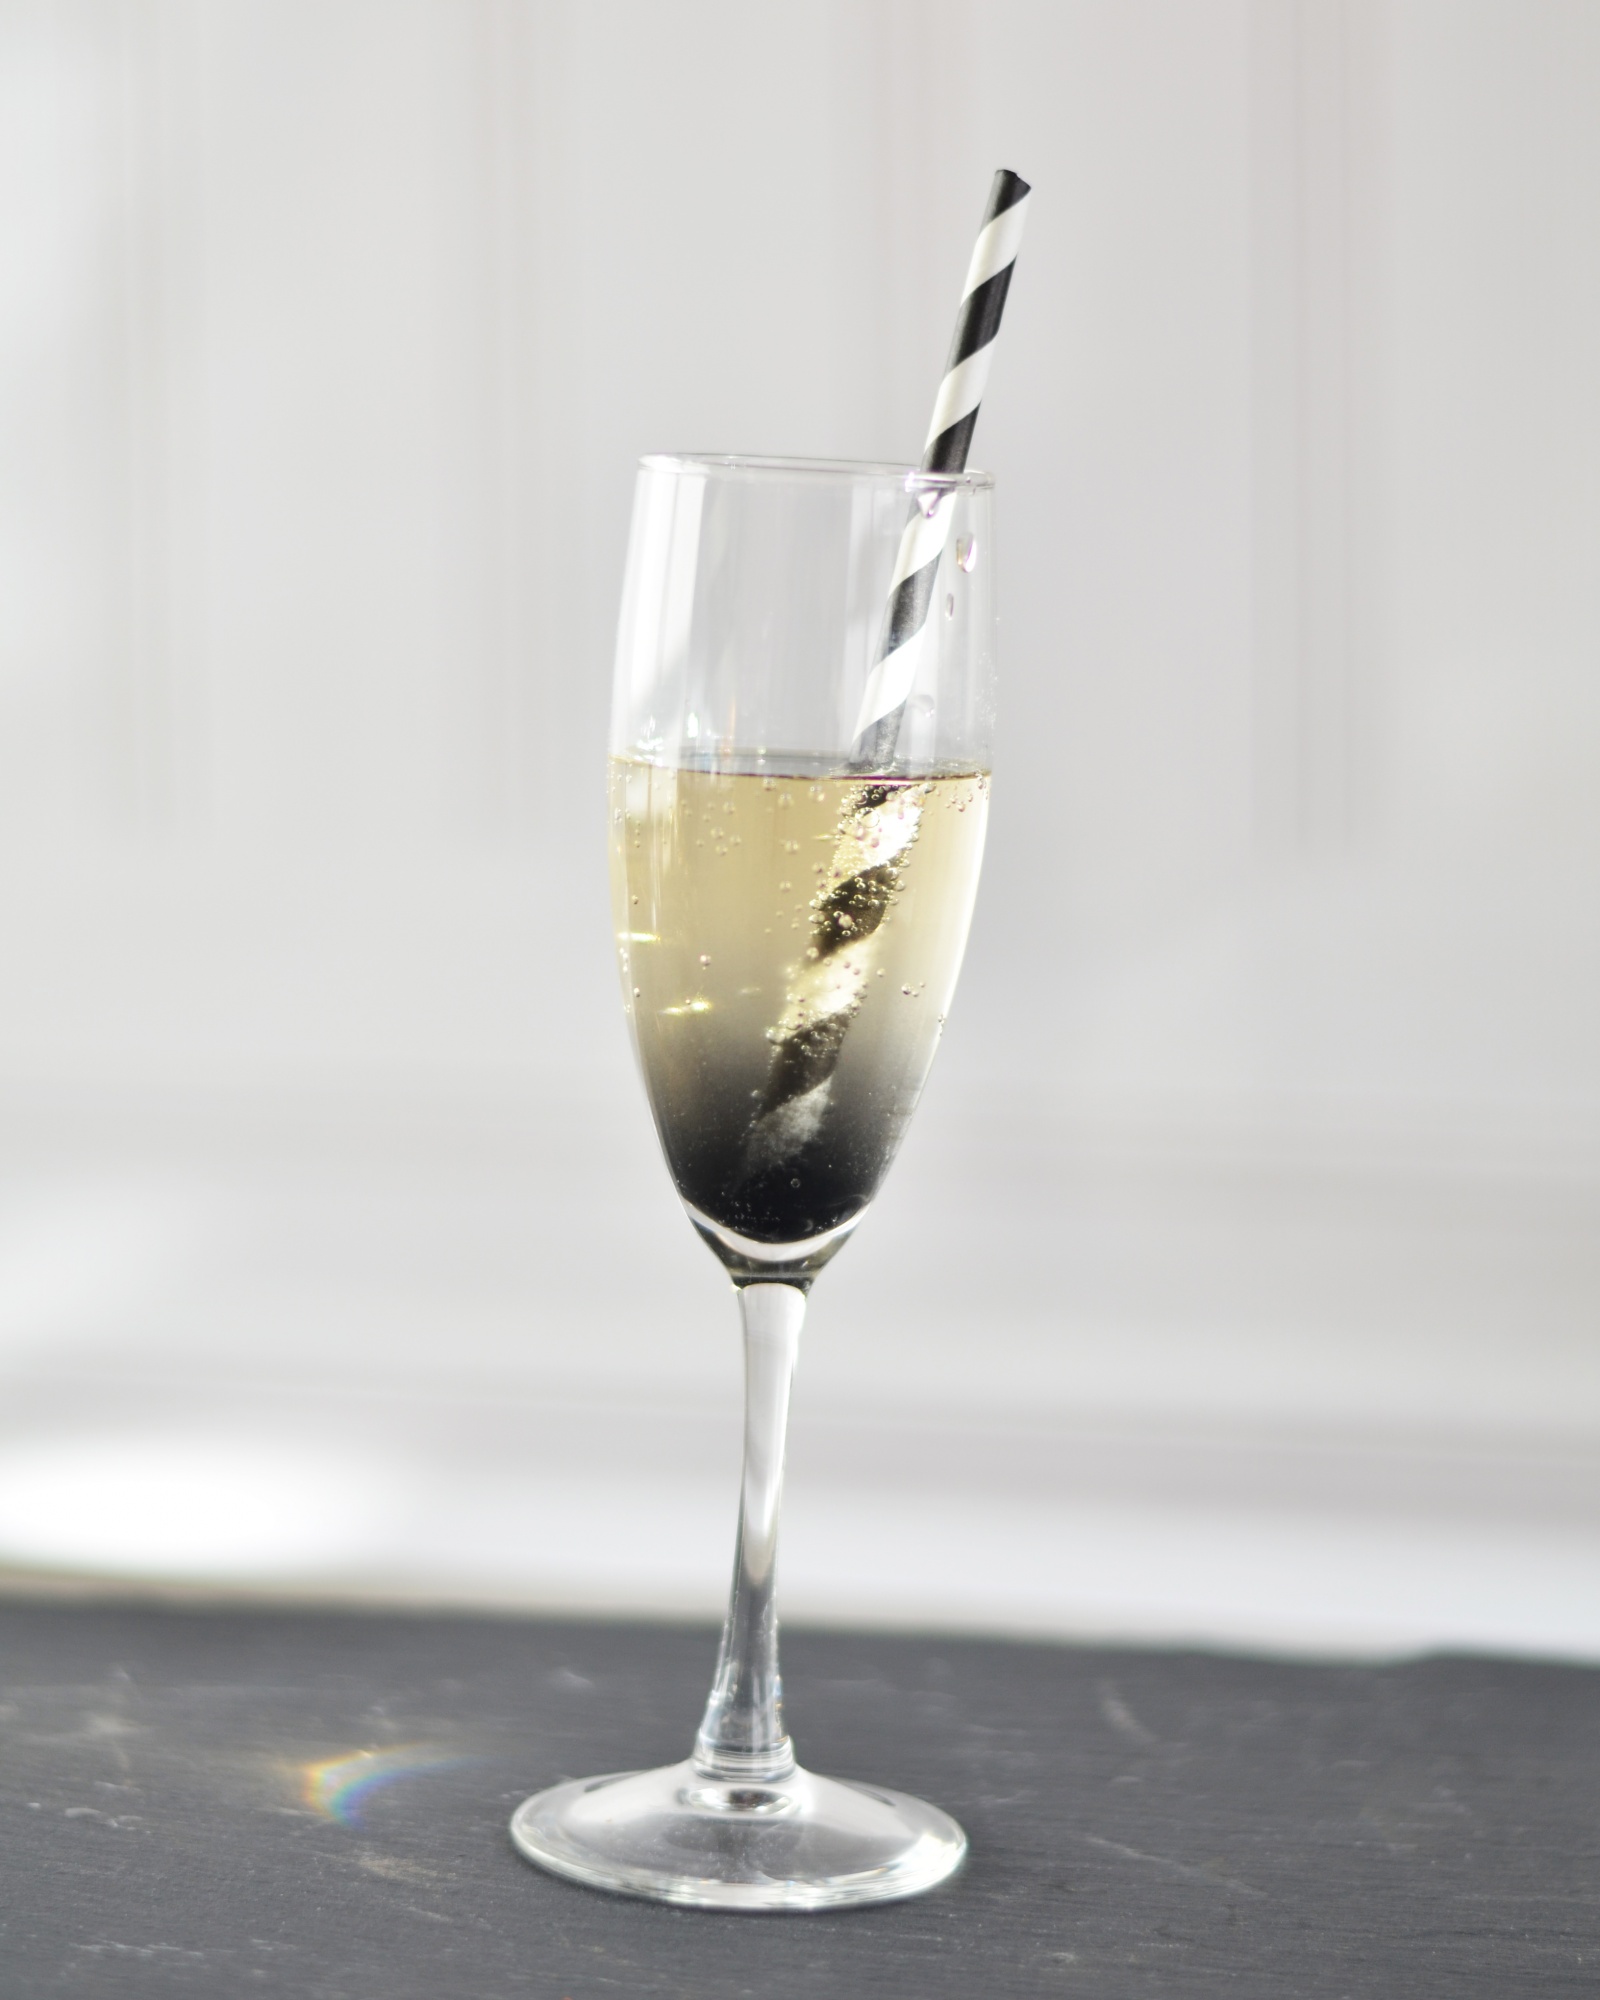 Black charcoal prosecco as a Halloween cocktail in a champagne glass.